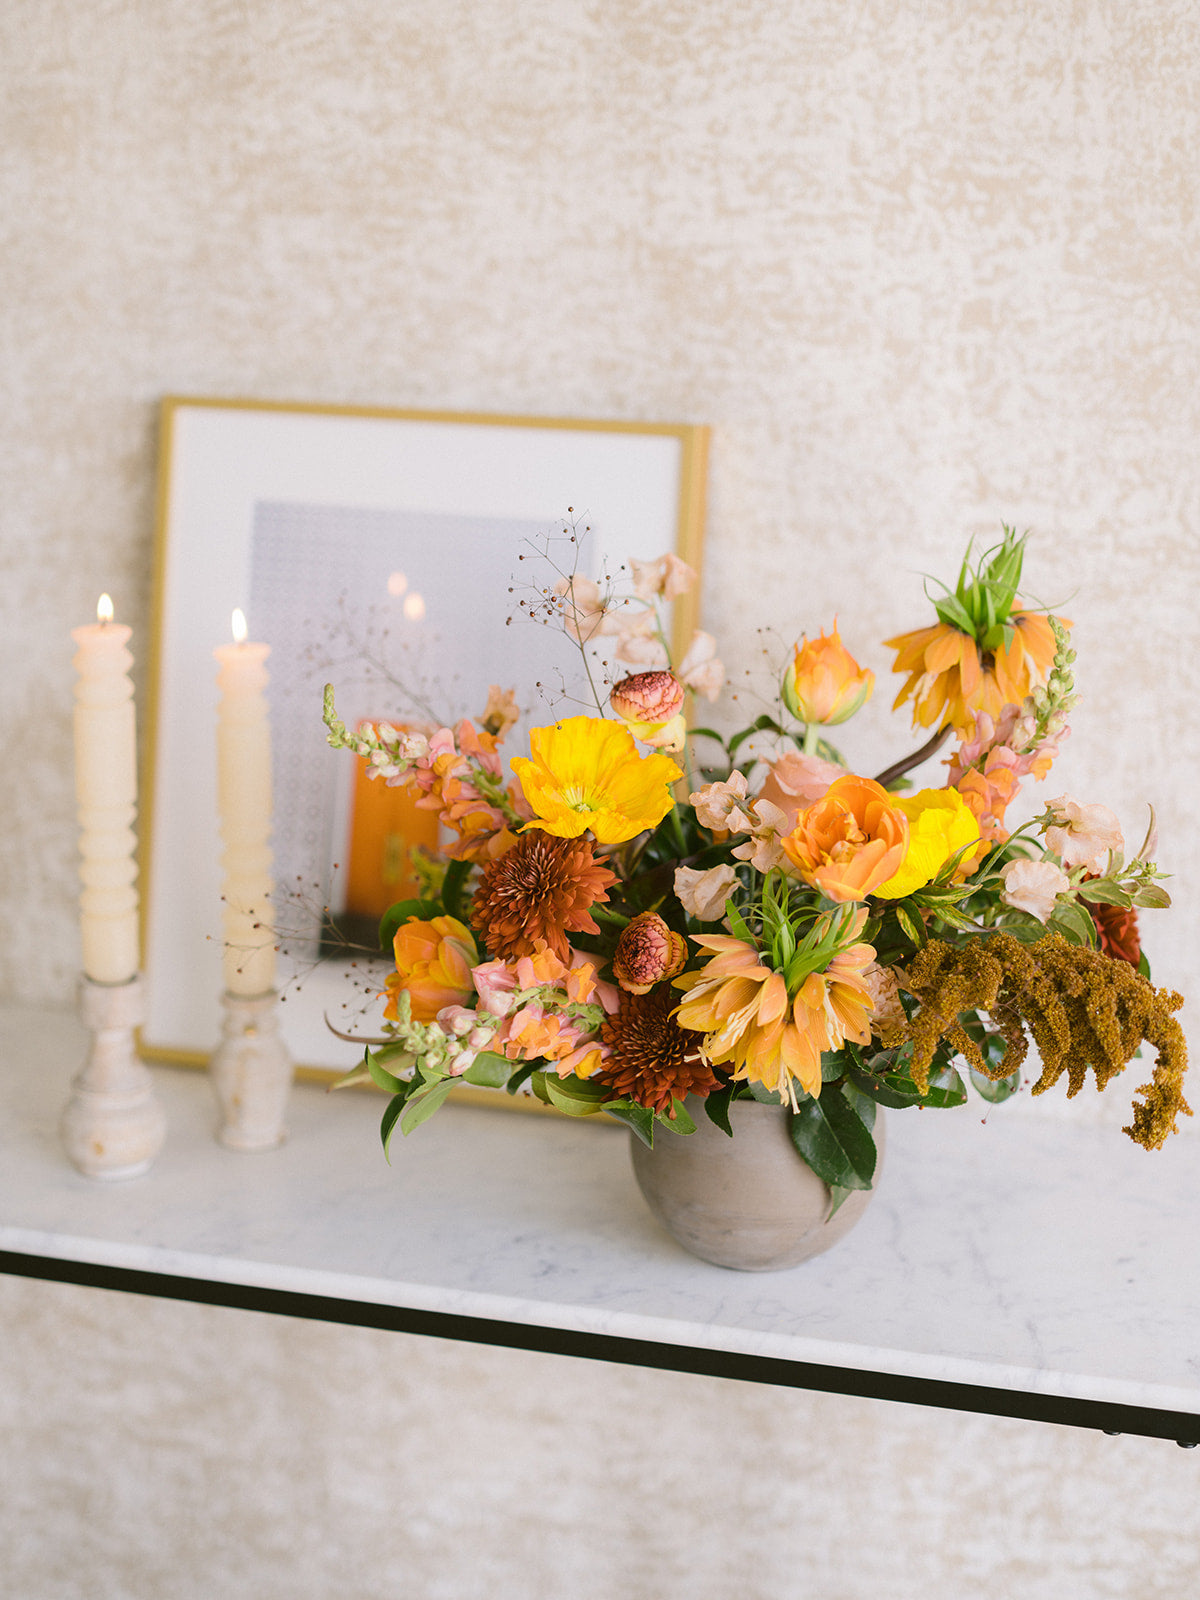 Flower Subscription: Save 10%